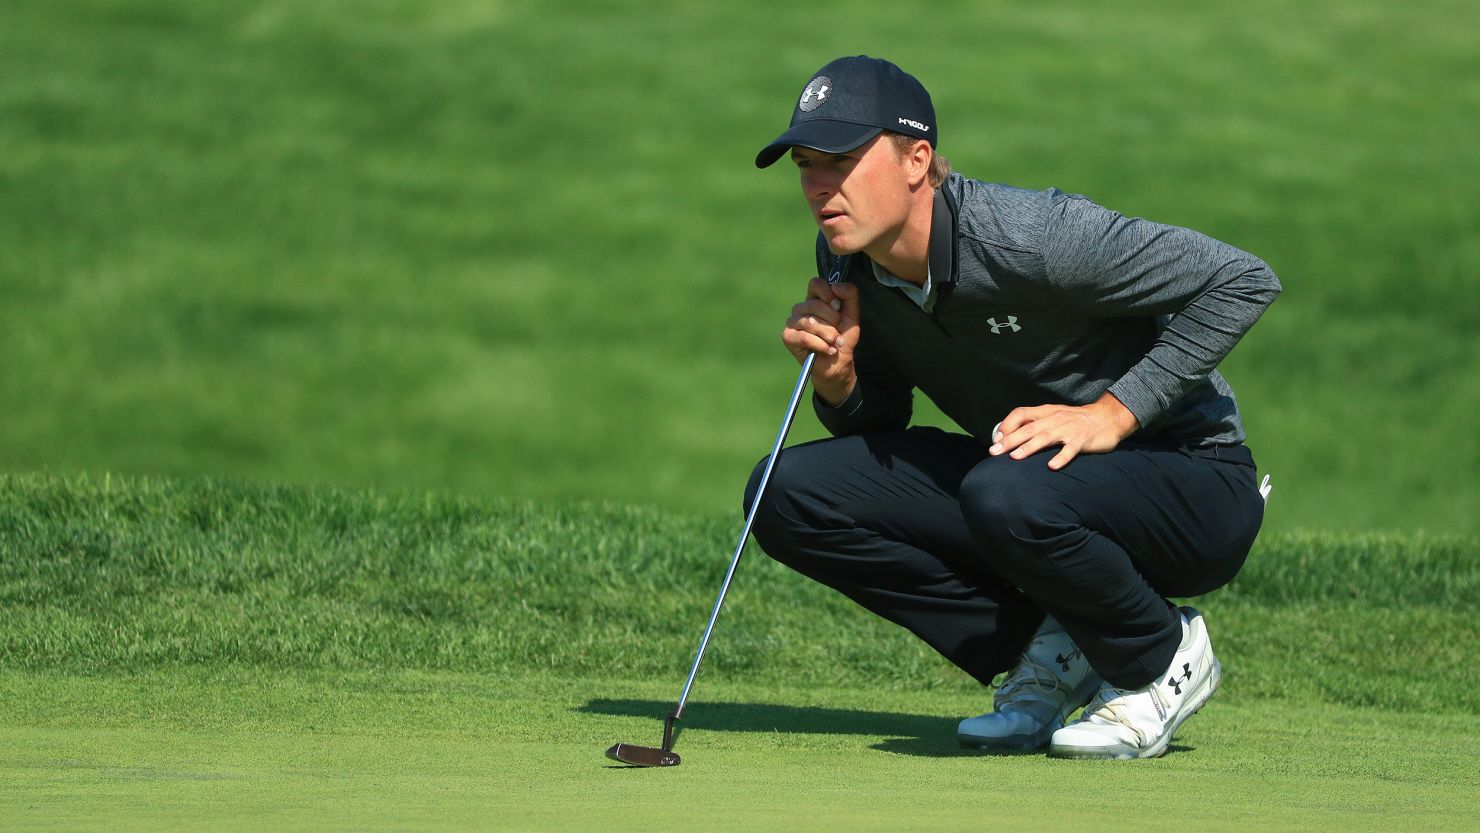 FARMINGDALE, NEW YORK - MAY 17: Jordan Spieth of the United States lines up a putt on the 16th green during the second round of the 2019 PGA Championship at the Bethpage Black course on May 17, 2019 in Farmingdale, New York. (Photo by Mike Ehrmann/Getty Images)